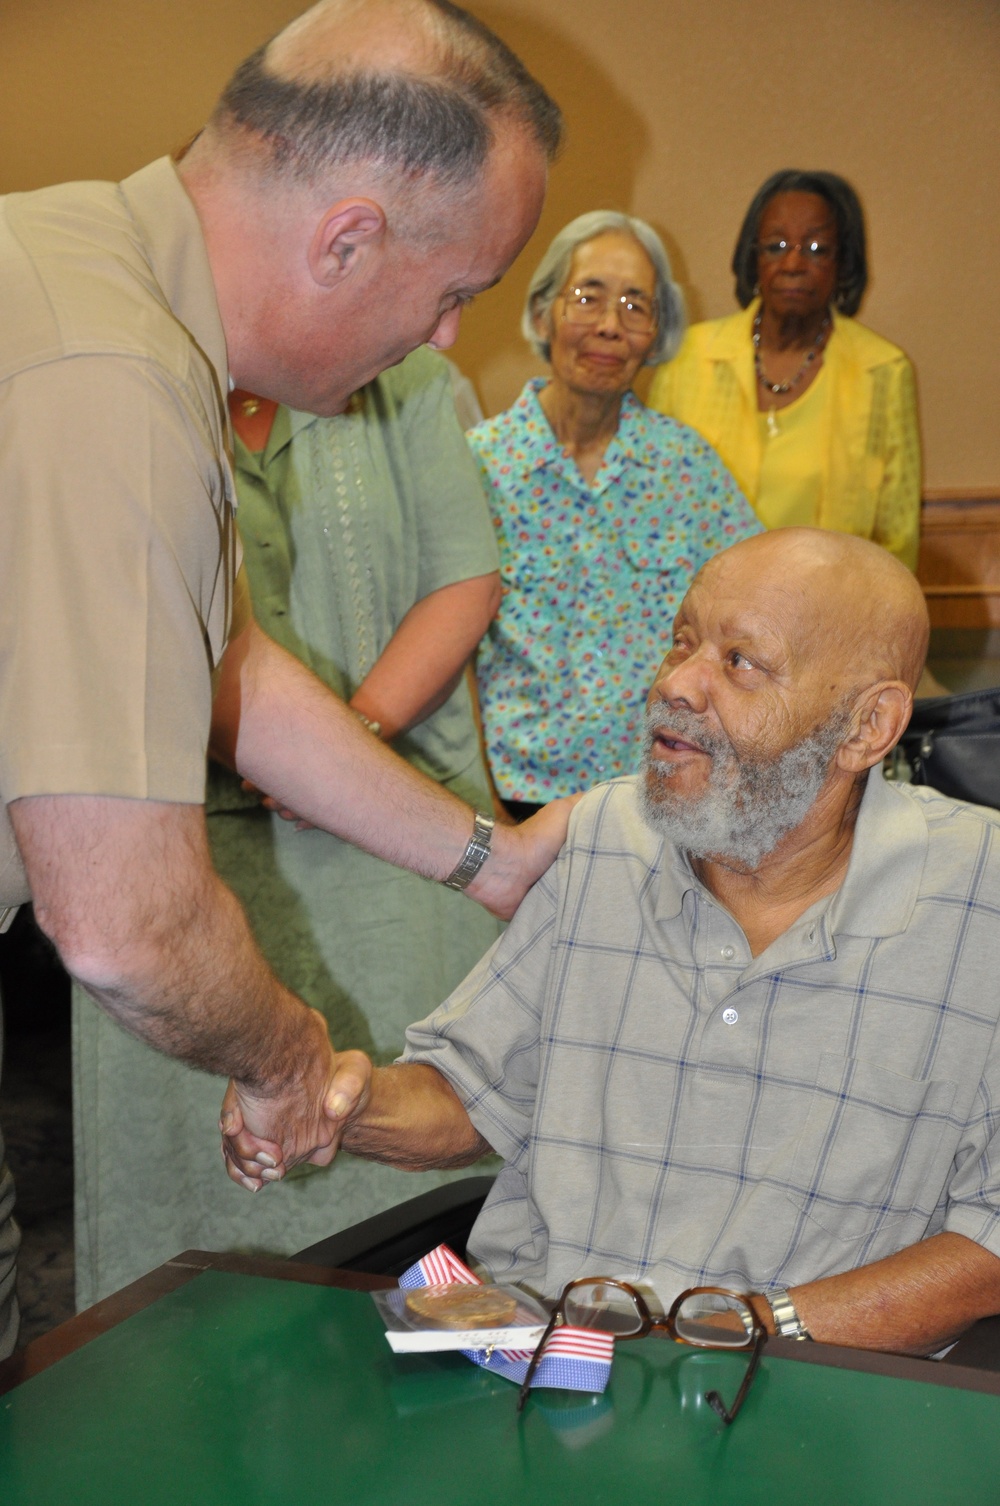 Barstow resident presented the Congressional Gold Medal